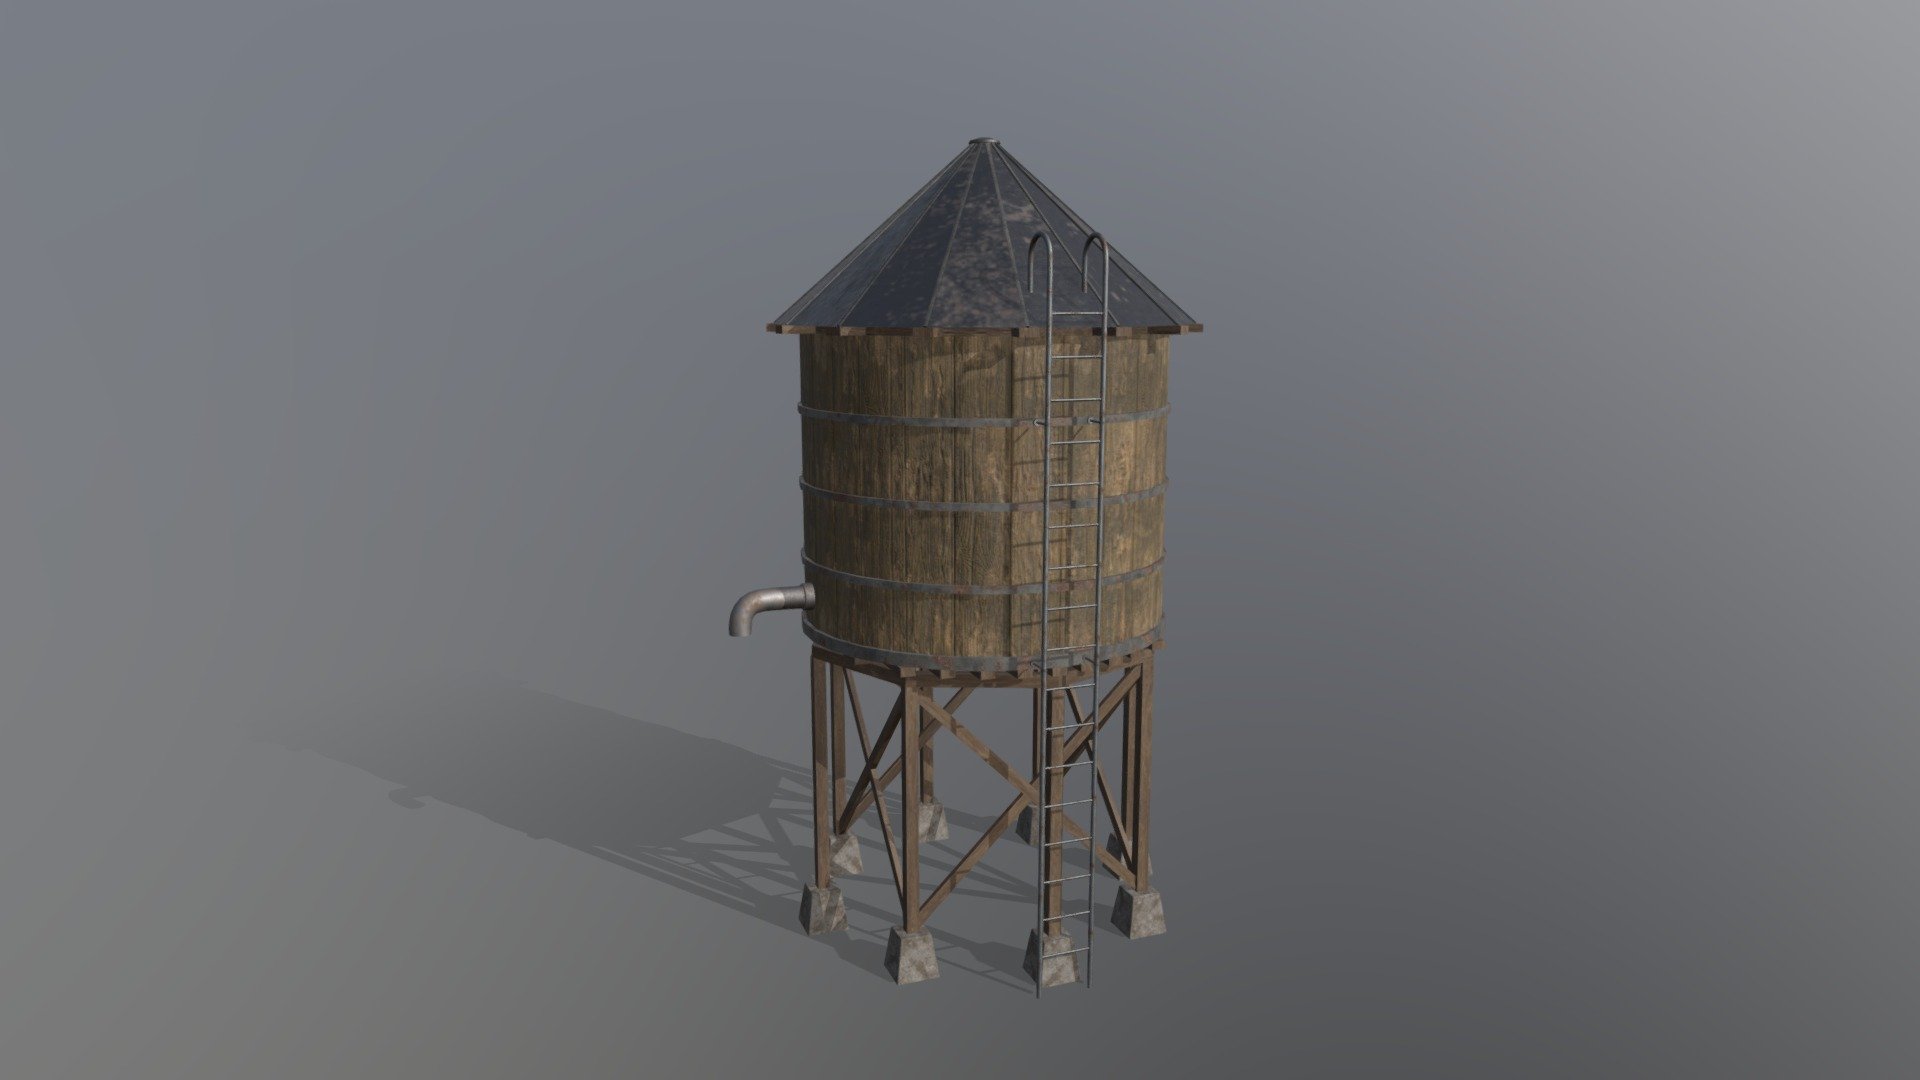 Water Tower 3D model part of the Farming Tools Pack v2 made specifically for Realtime Rendering engines. 
Check out my artstation account for more info: https://www.artstation.com/artwork/8l6N2x - Water Tower - Buy Royalty Free 3D model by Pixel Hearts (@pixelhearts) 3d model